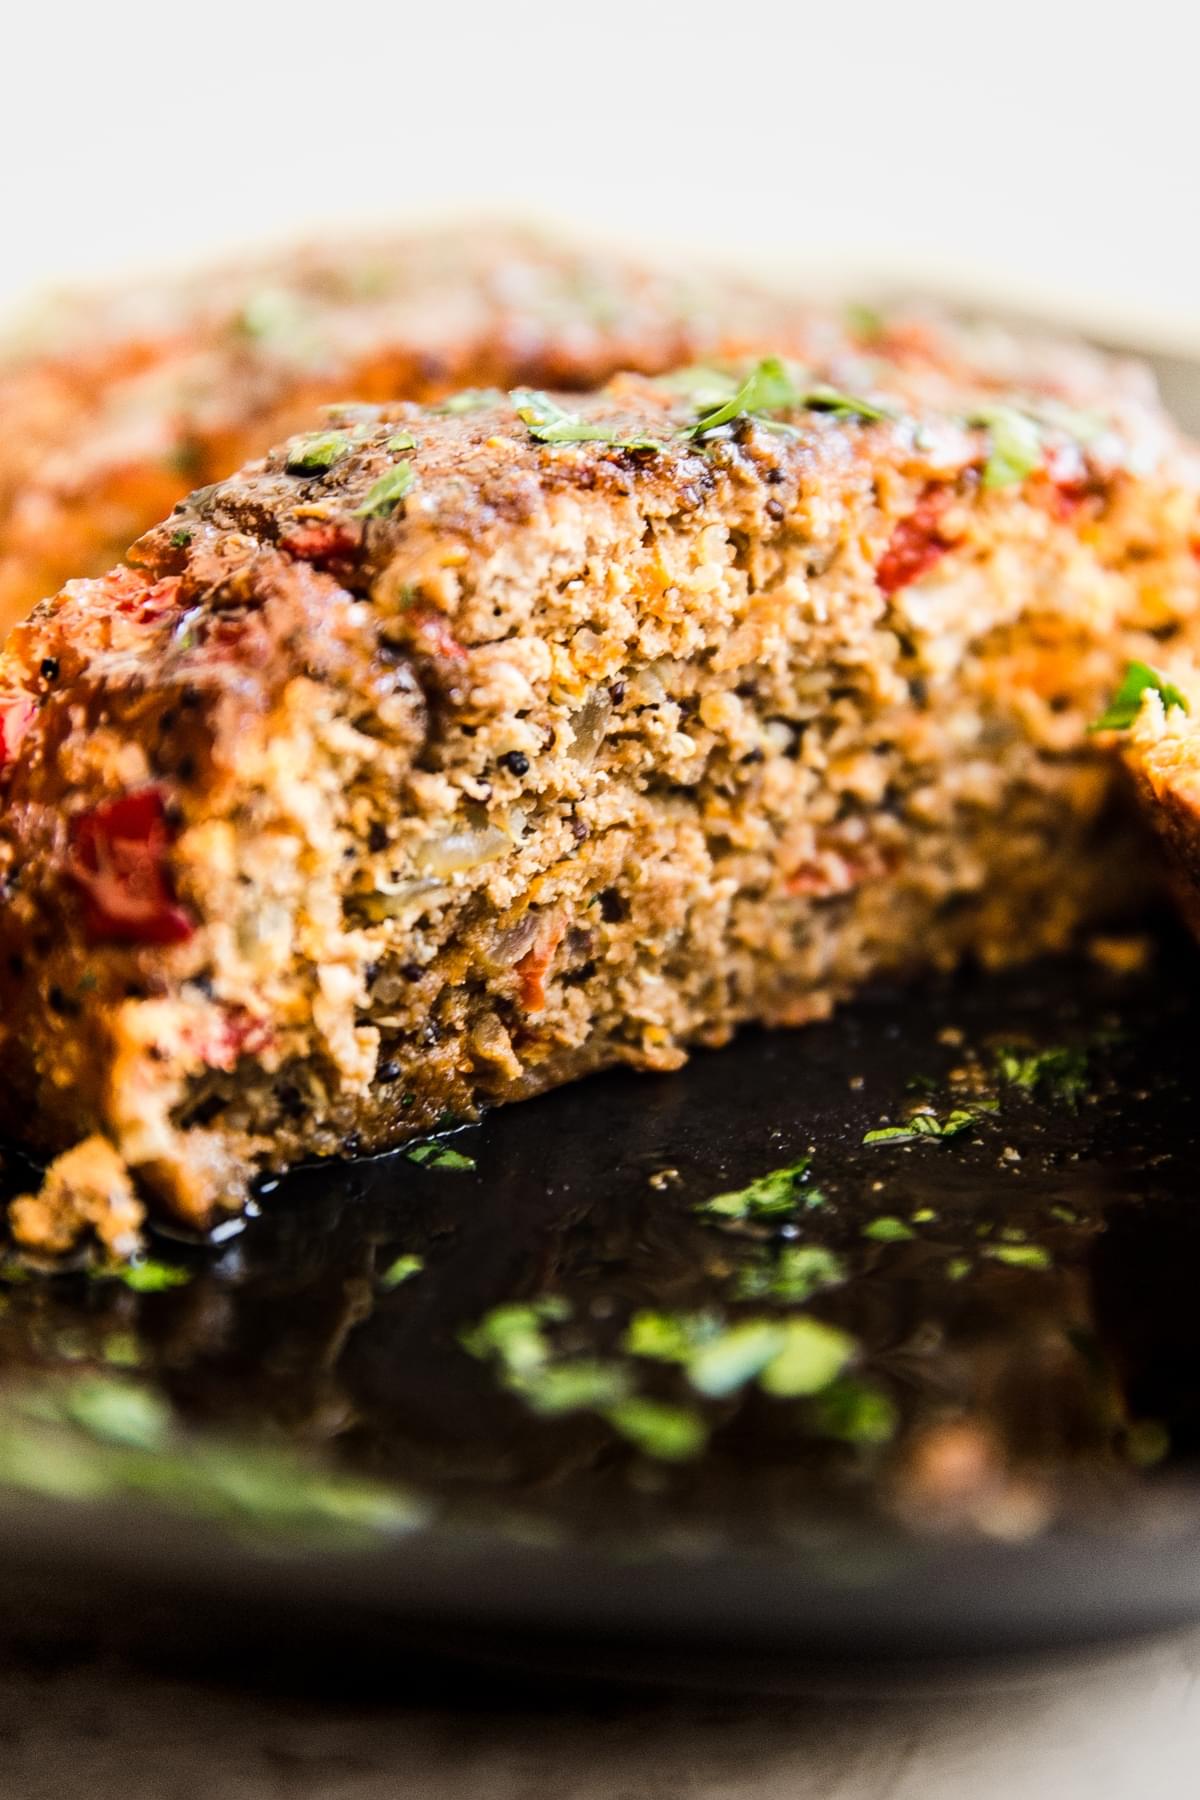 A slice of homemade meatloaf on a plate